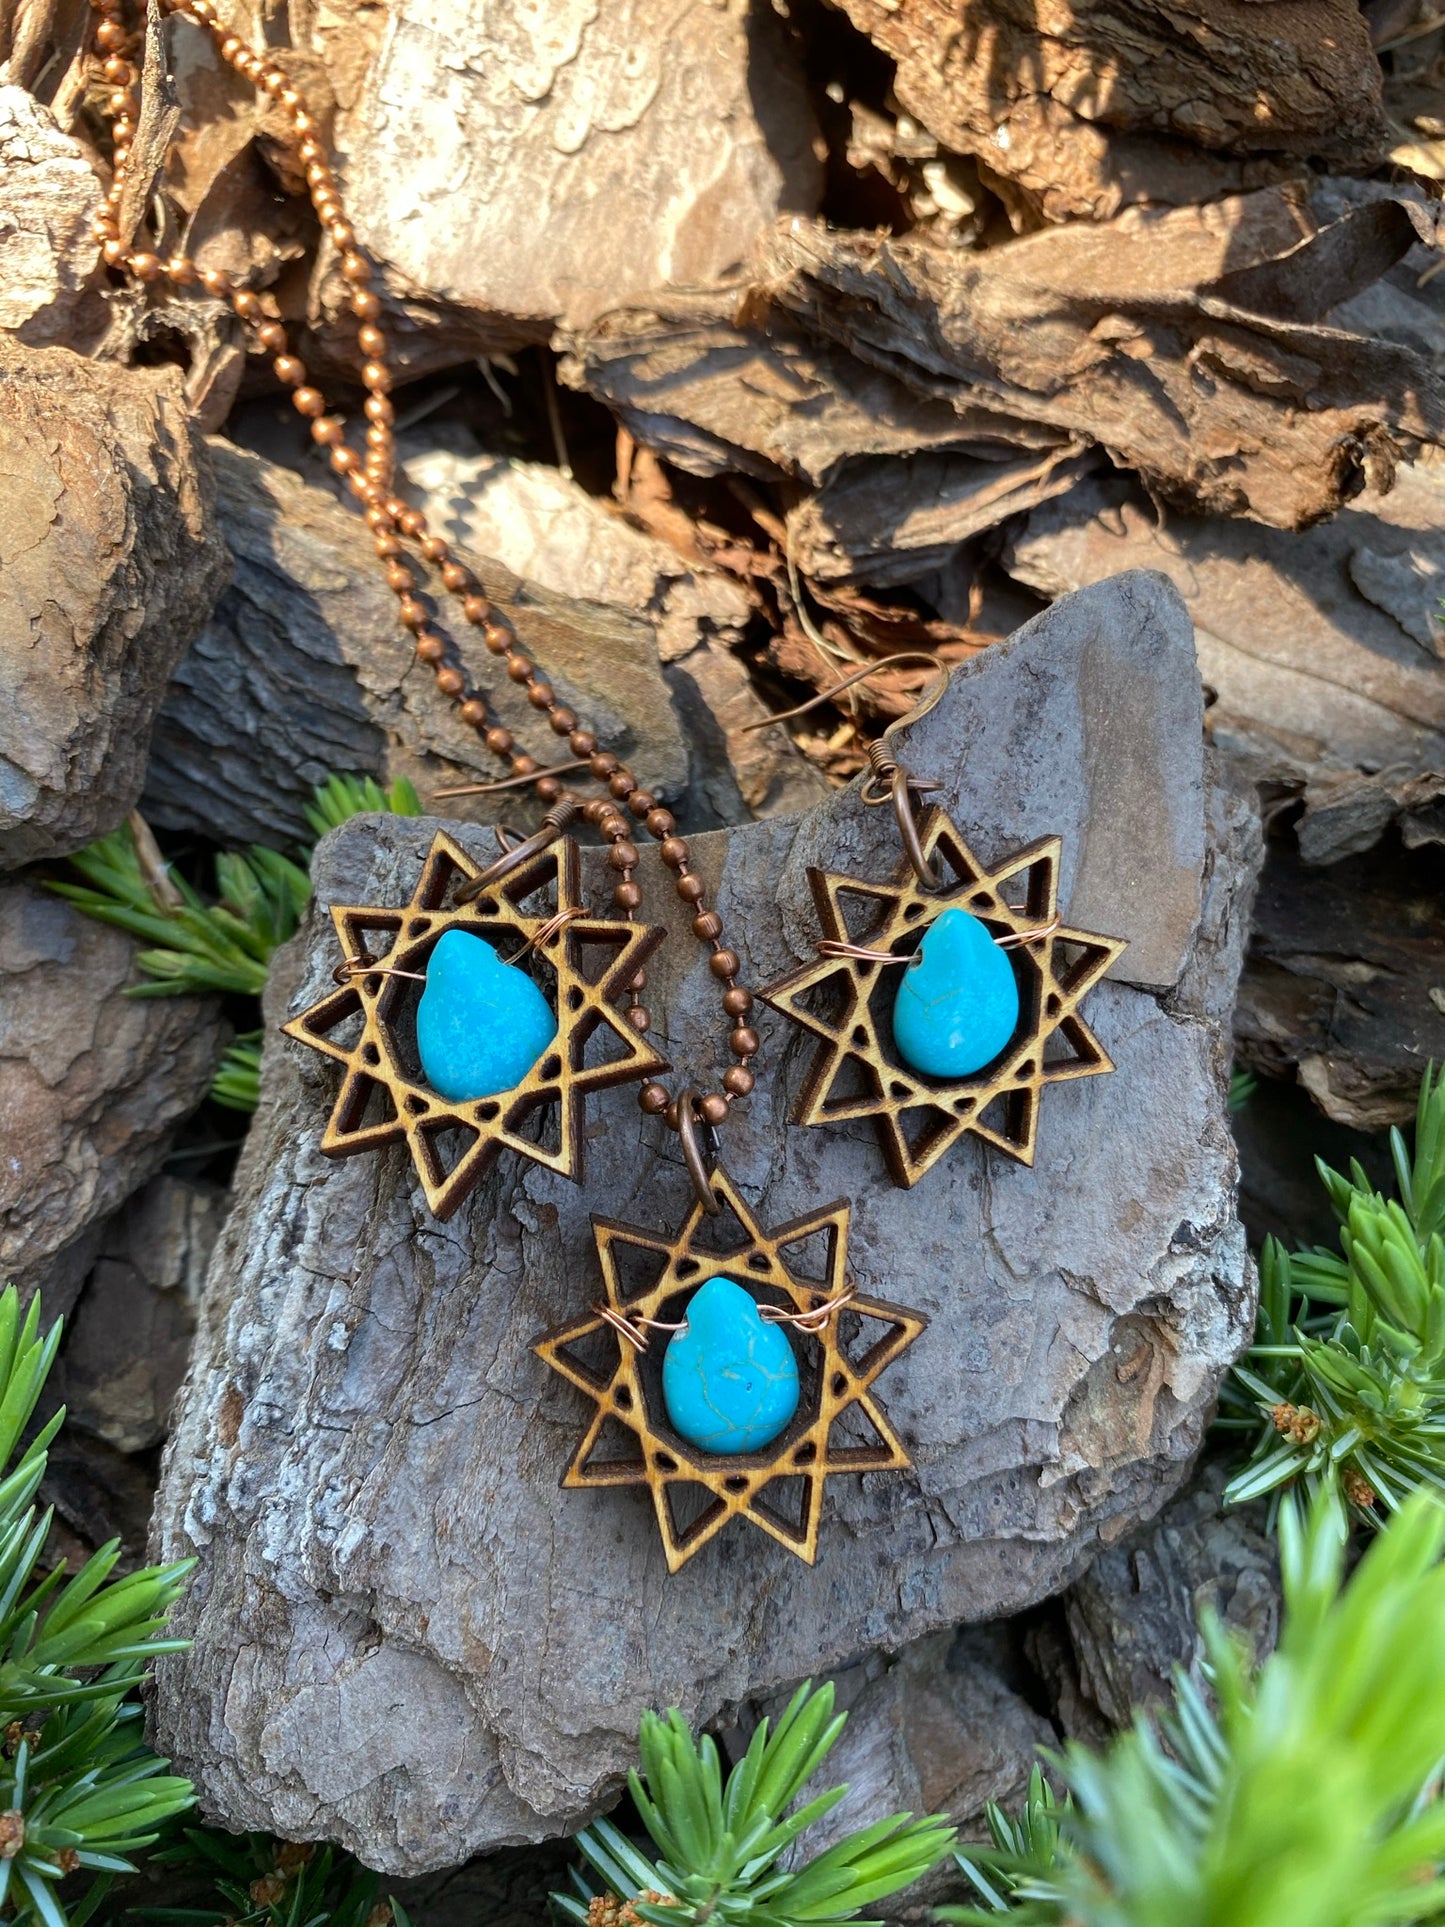 Nine Pointed Star Necklace And Earring Set With Turquoise Beads